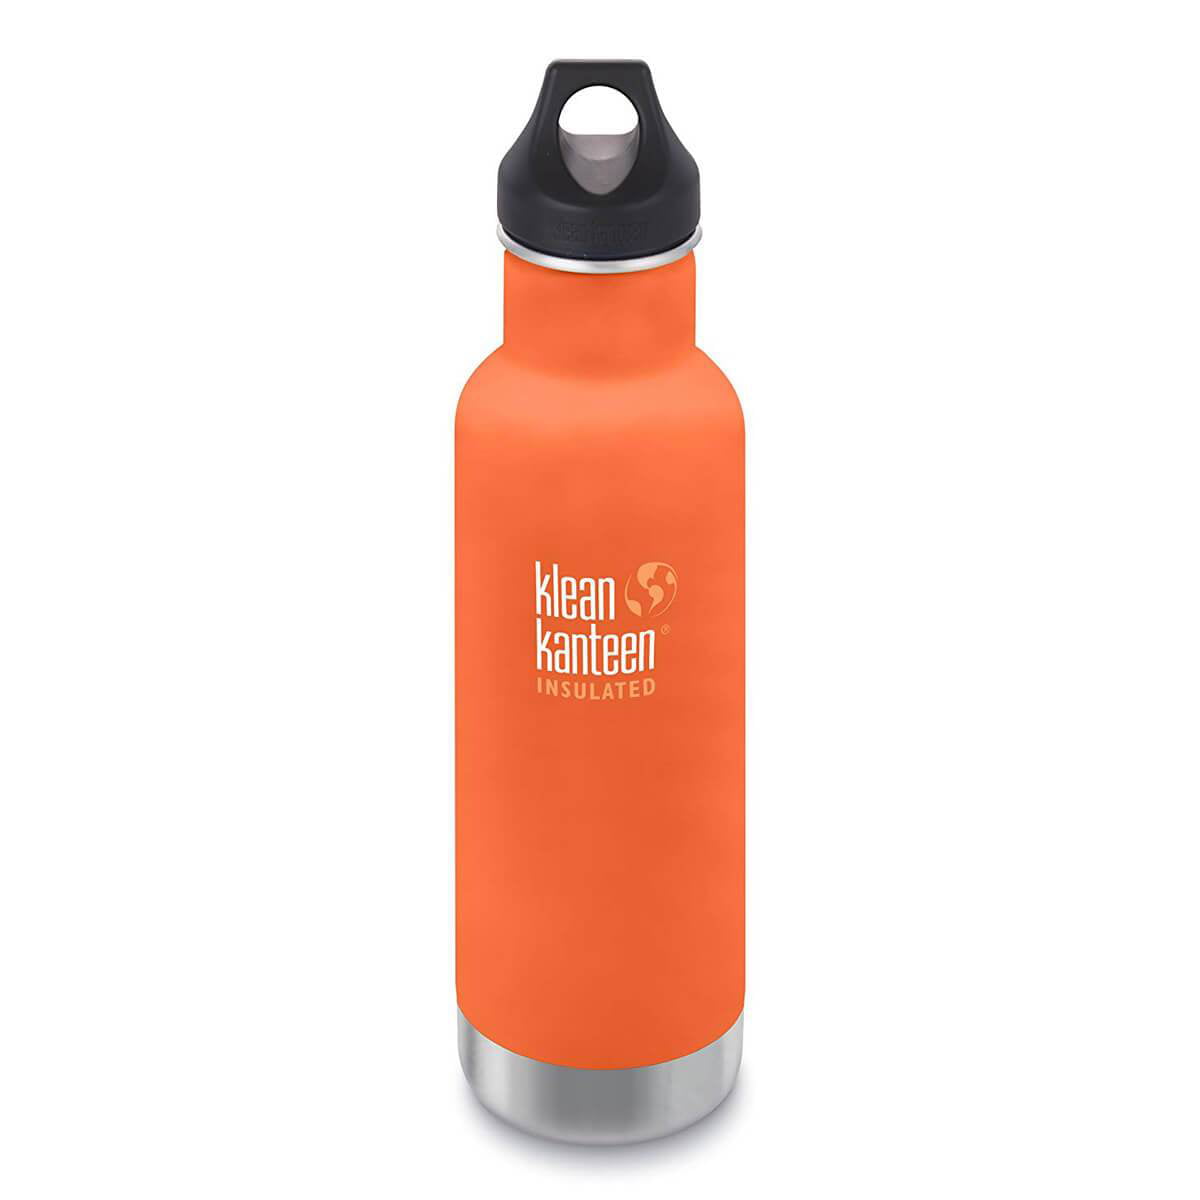 Klean Kanteen Insulated Classic Bottle with B&H Logo 1004644 B&H